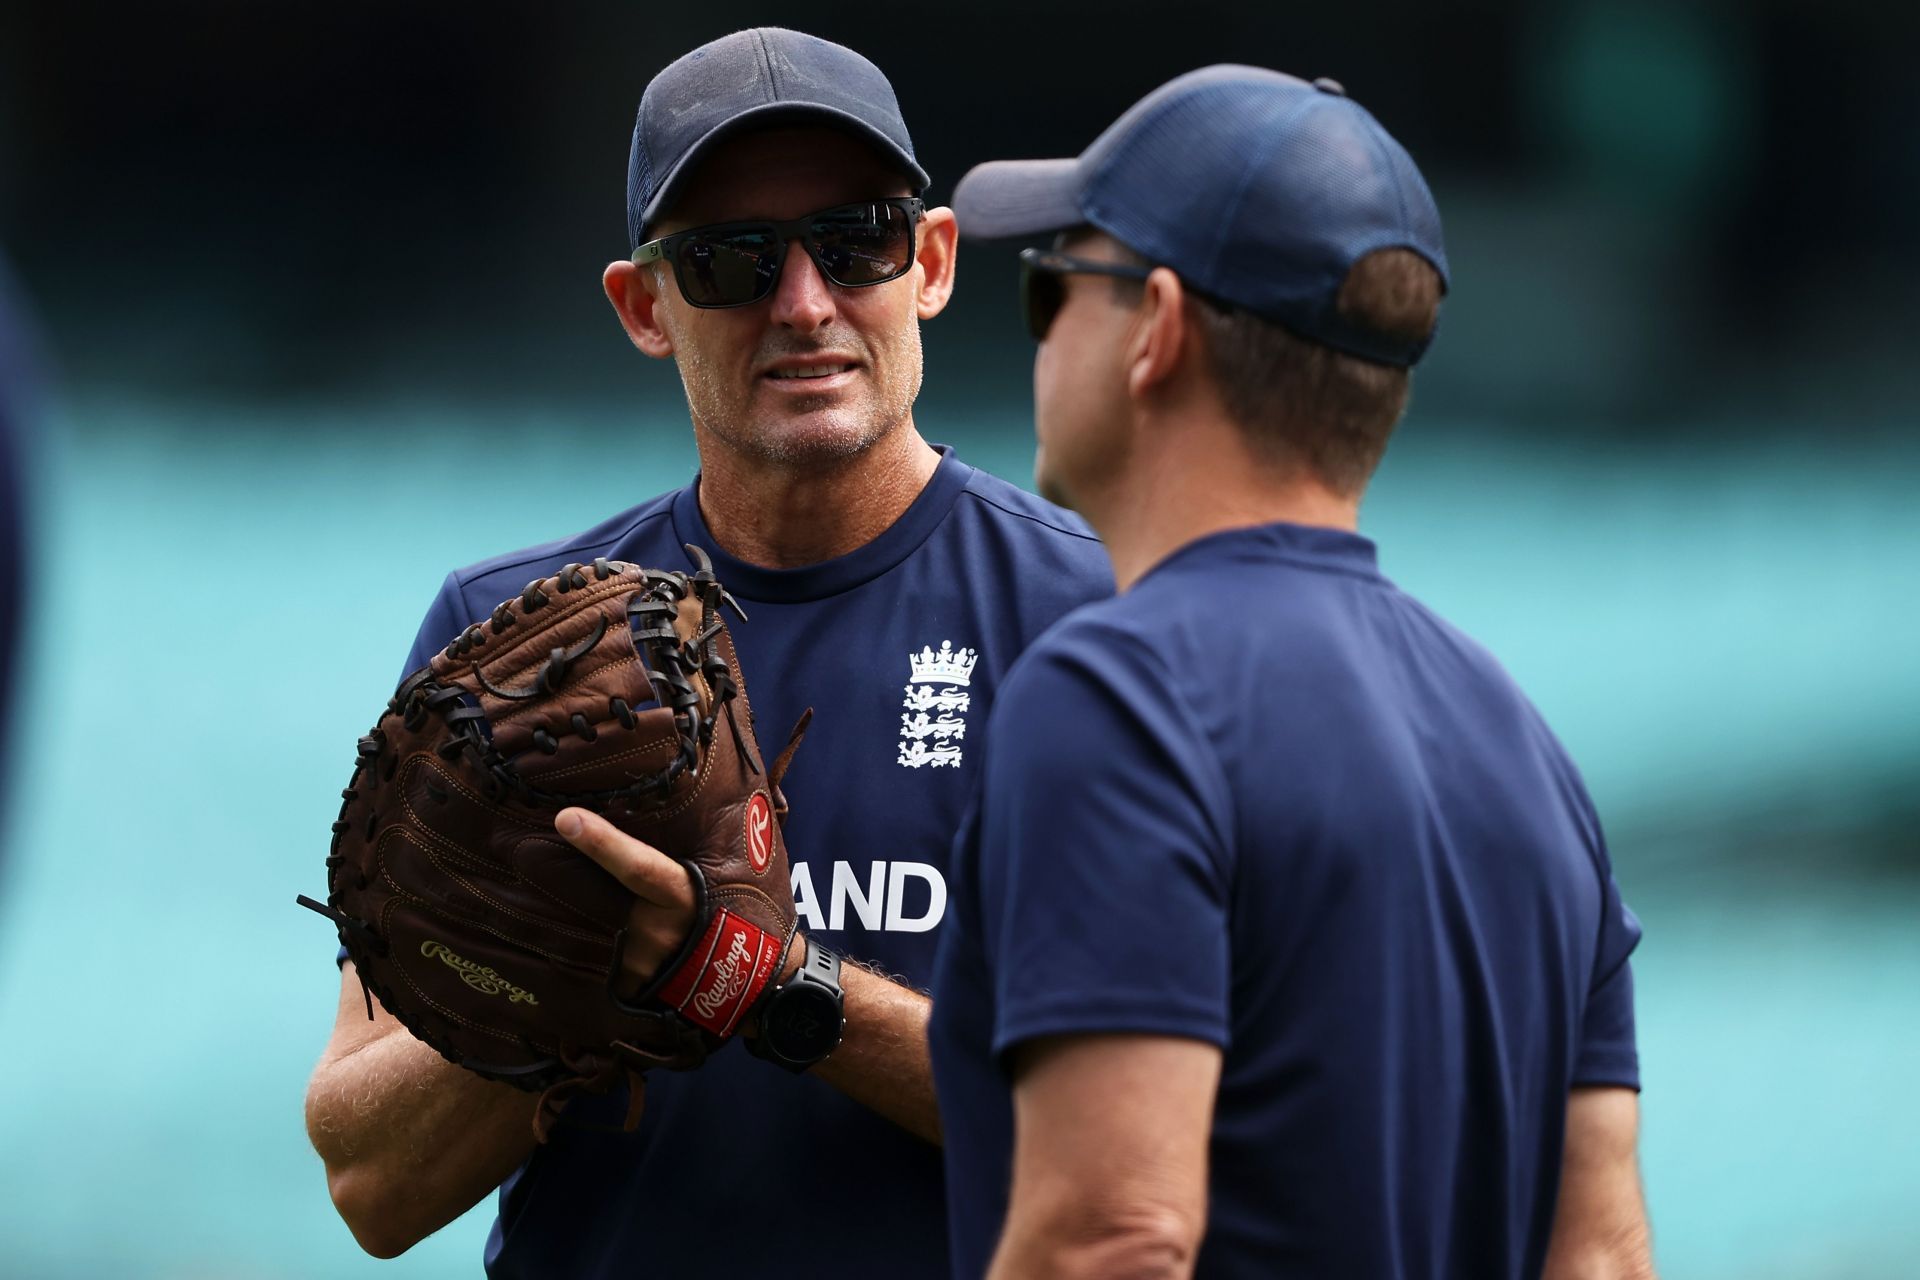 England ICC T20 World Cup Team Training Session (Image: Getty)